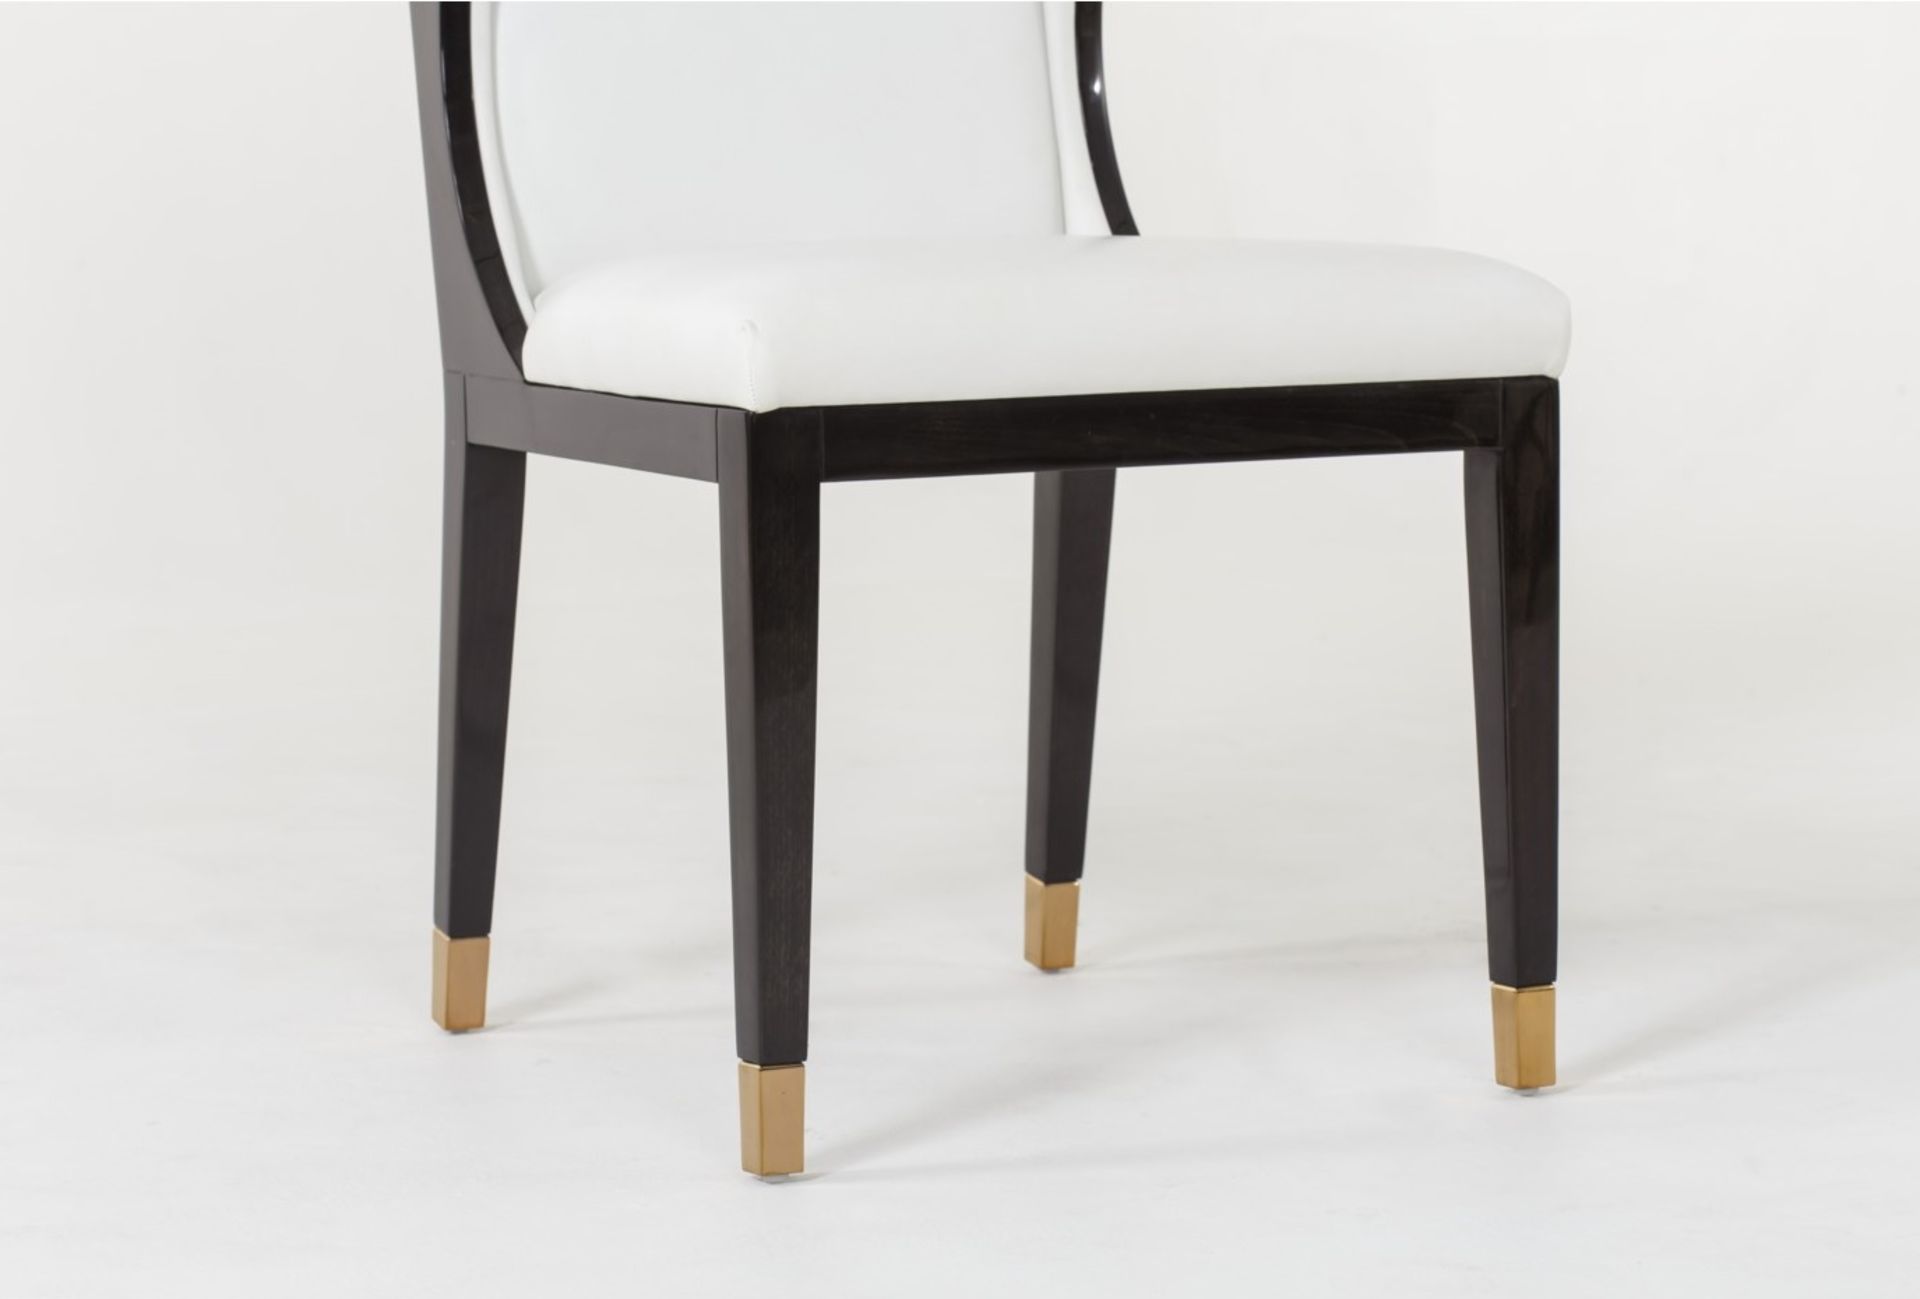 Kelly Hoppen Taylor Dining Chair Fallon White Leather - Image 2 of 2